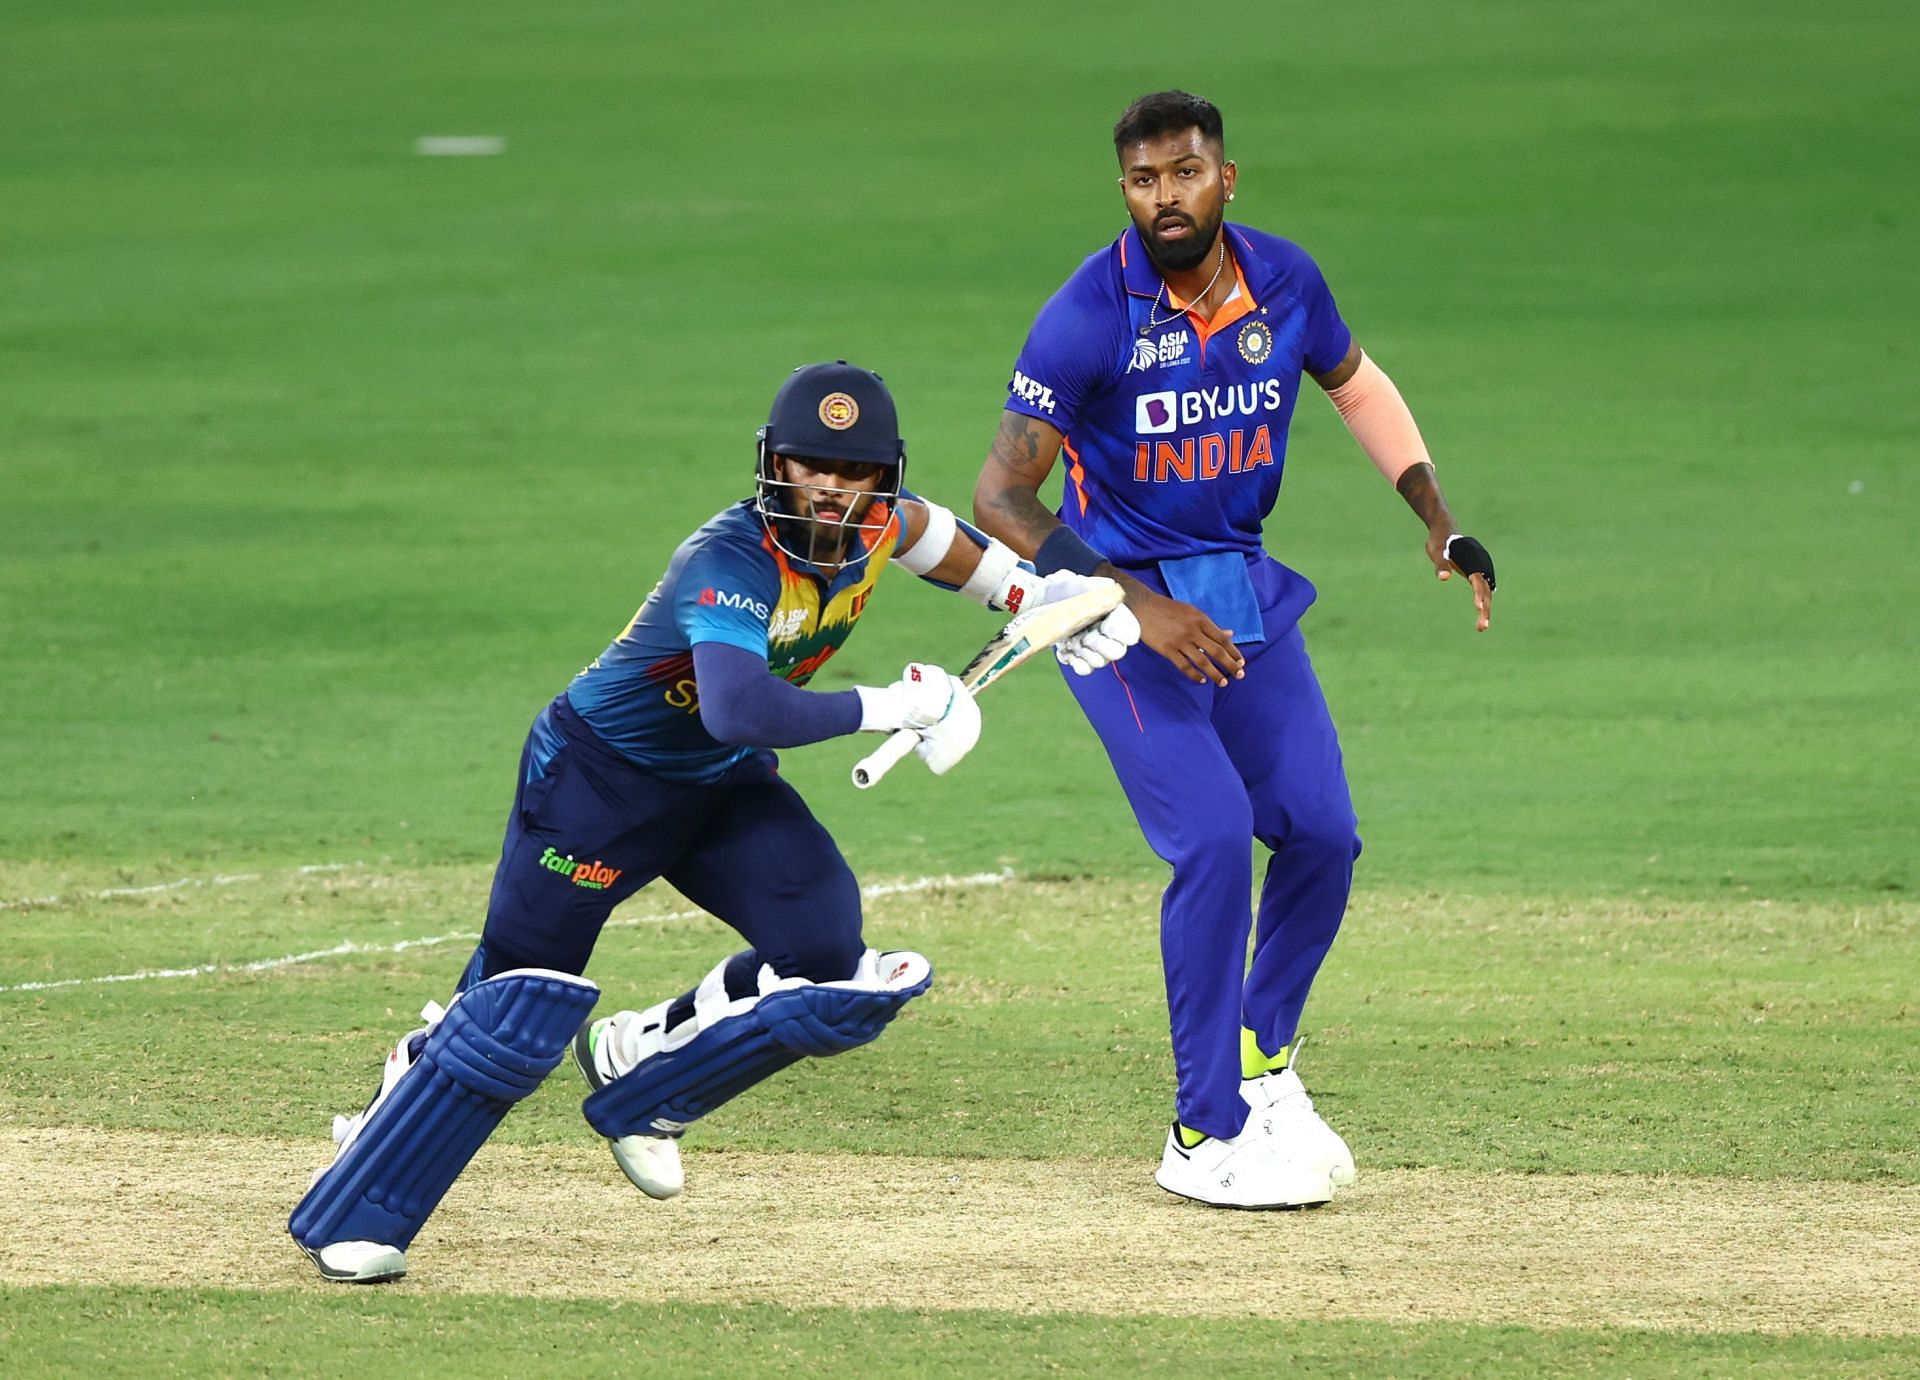 Hardik Pandya played as the third pacer in the Asia Cup Super 4 matches against Pakistan and Sri Lanka.